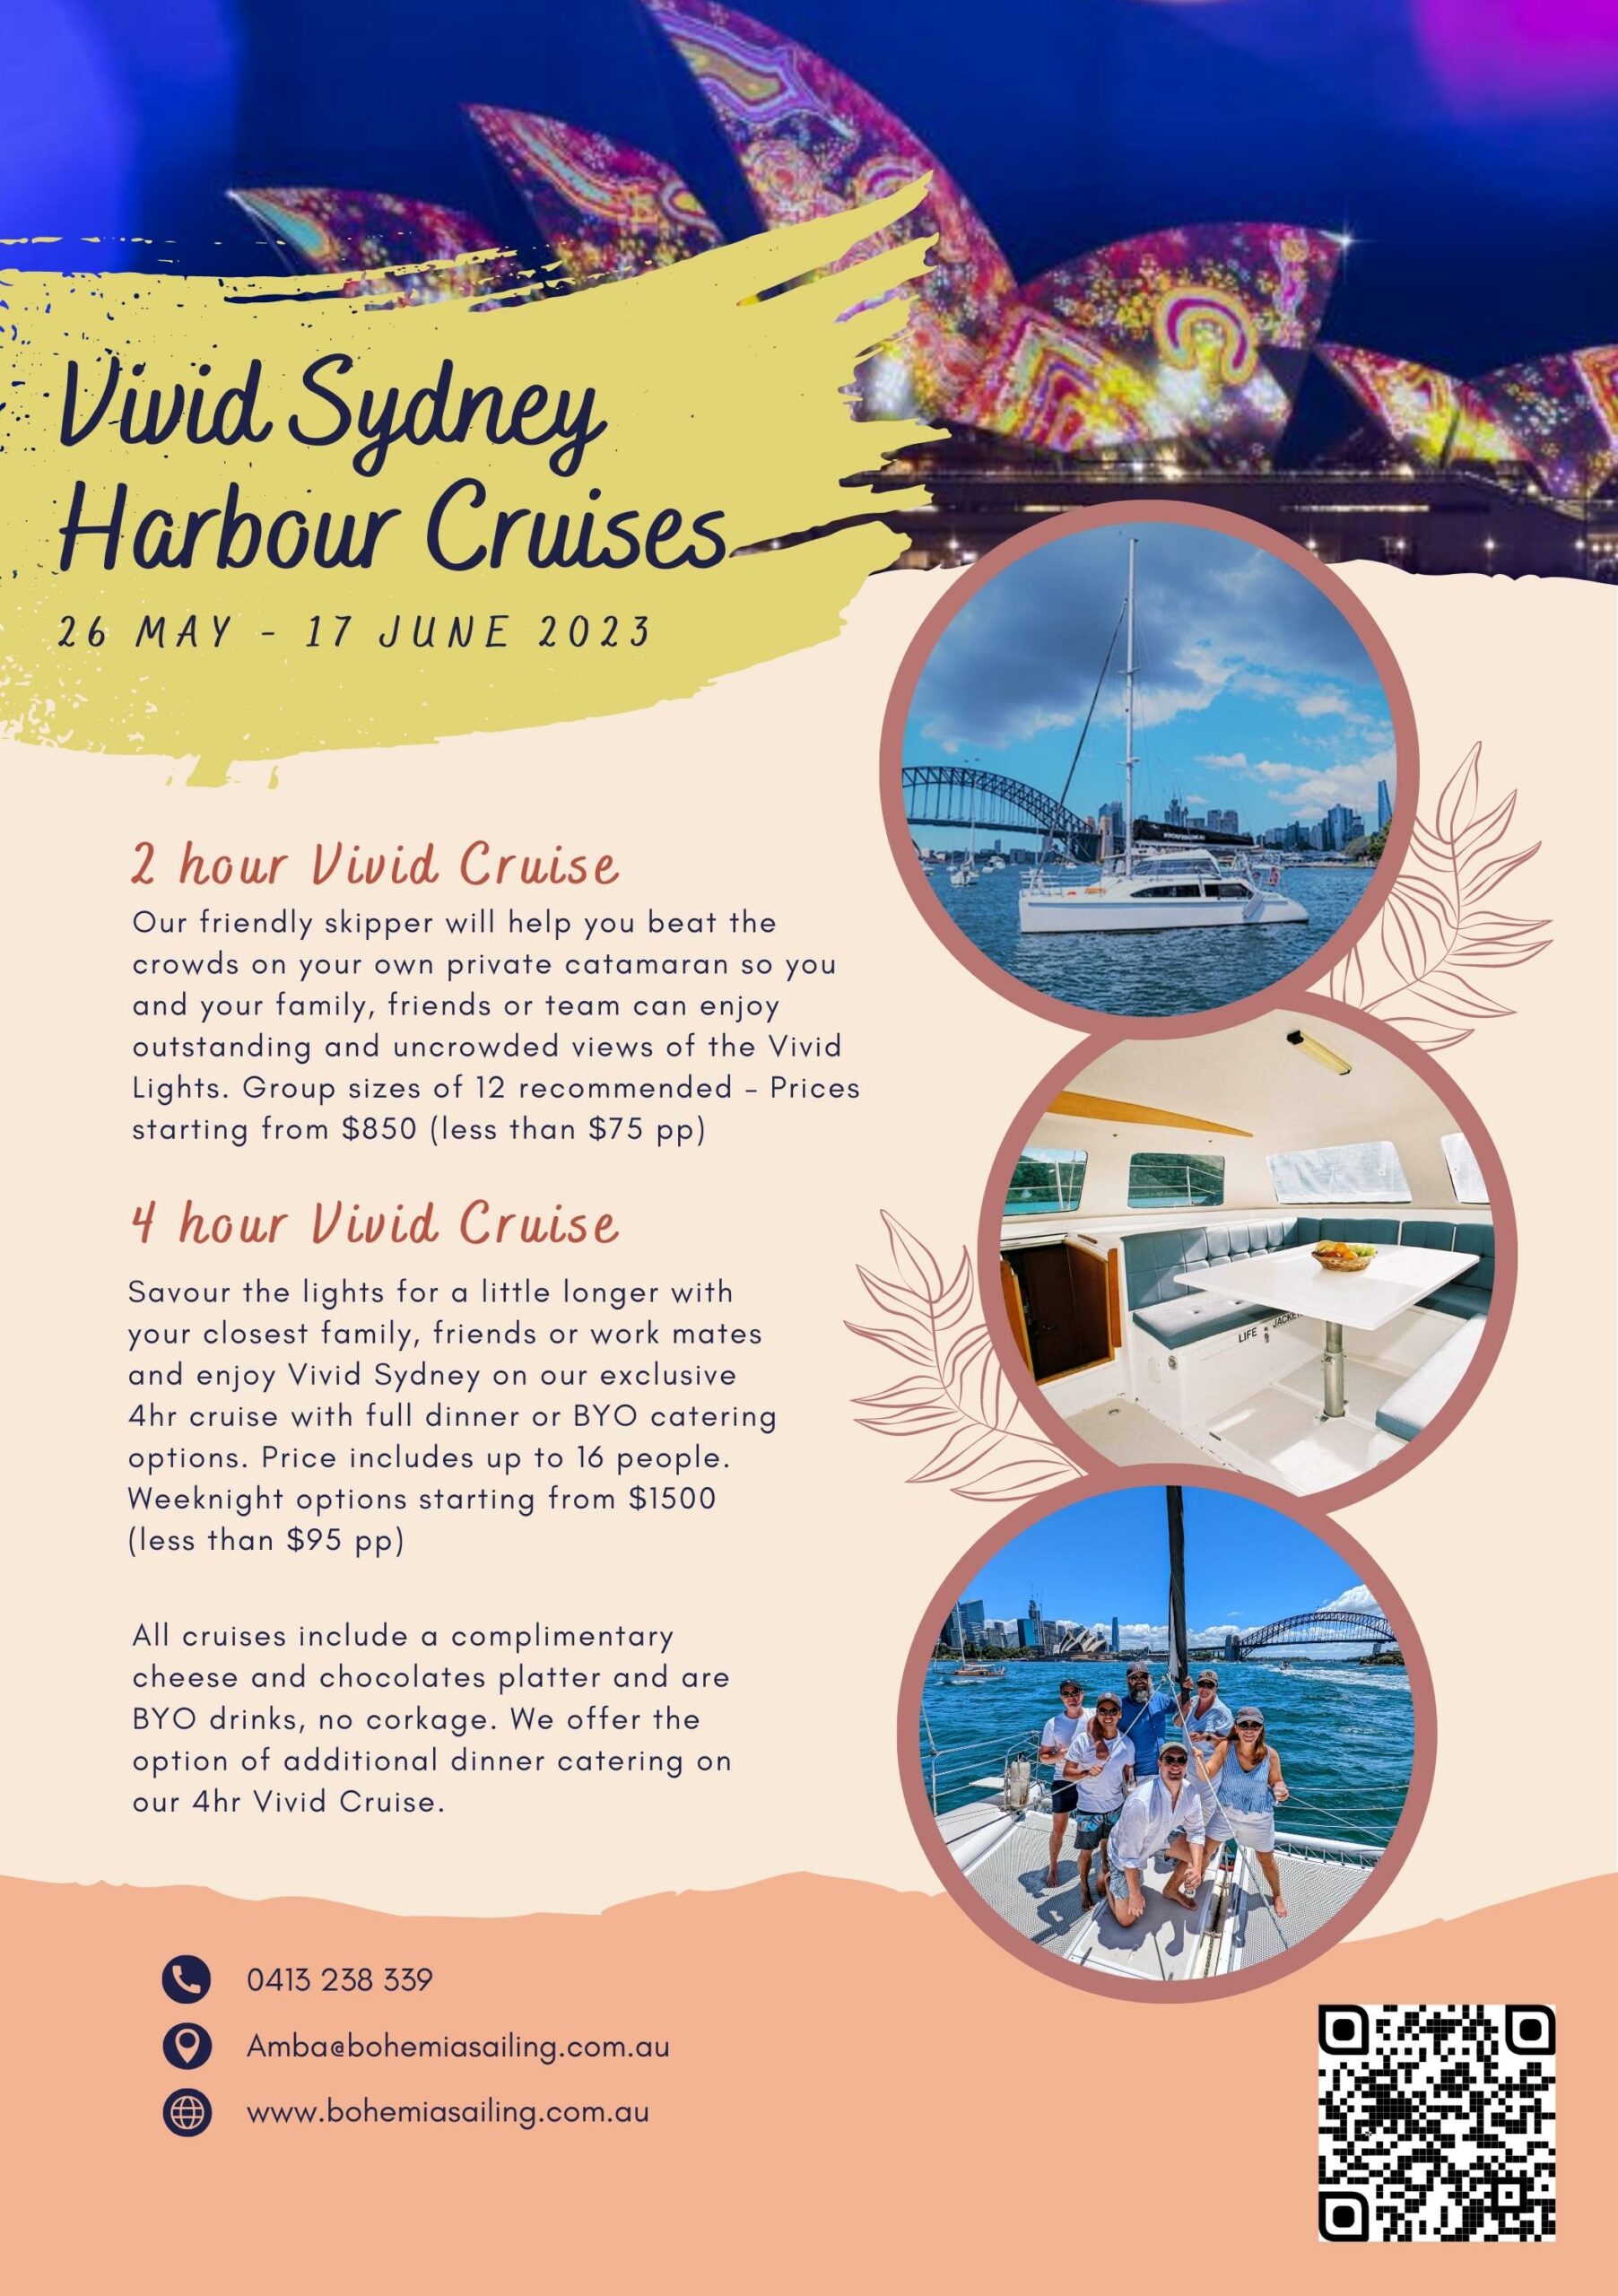 Weekend 2hr Vivid Sydney Harbour Cruise with complimentary cheese and chocolate platter